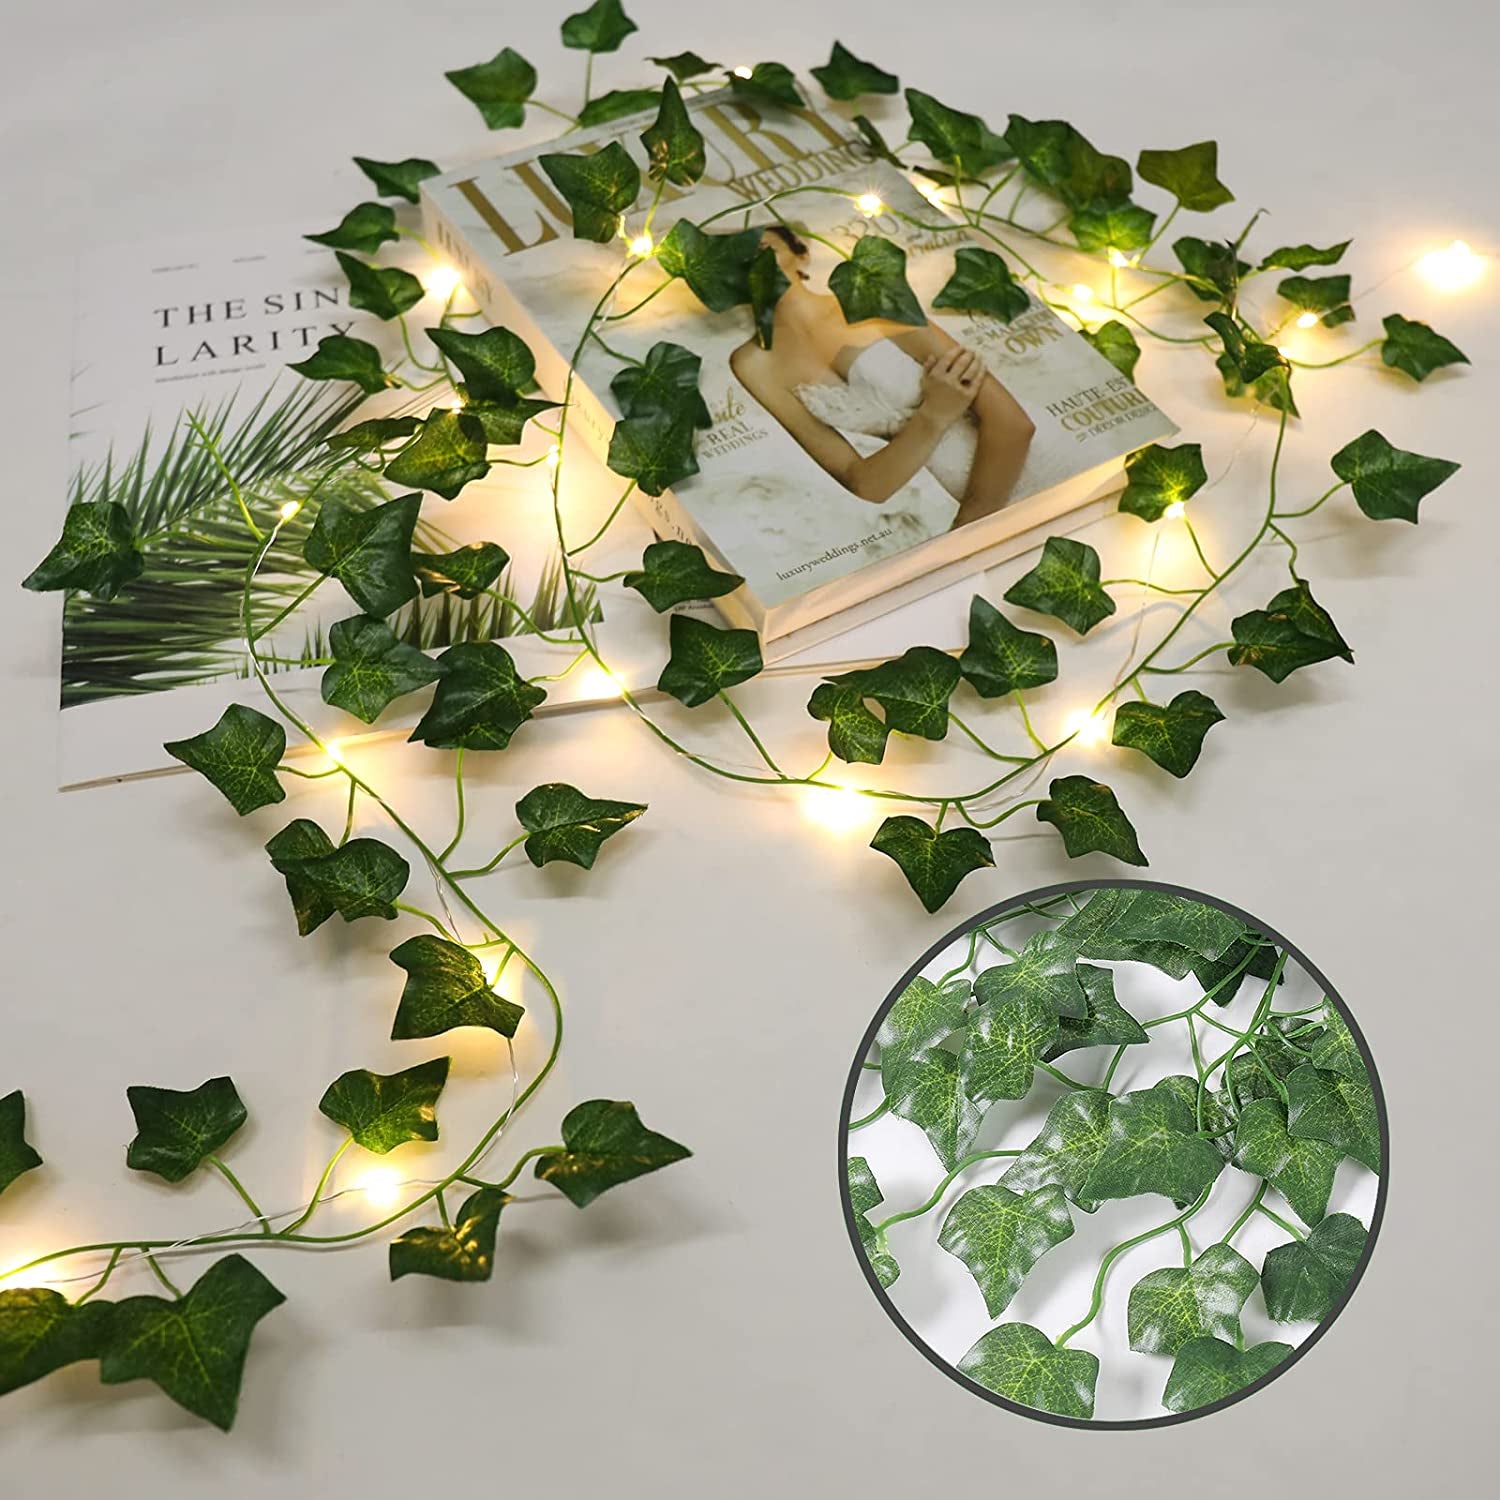 12Pack Vines with LED String Lights, Room Decor Fake Ivy, Wall Decor Artificial Ivy Garland, Garden Decor Fake Vines, Artificial Plants Leaves Aesthetic Garden Accessories(84Ft)